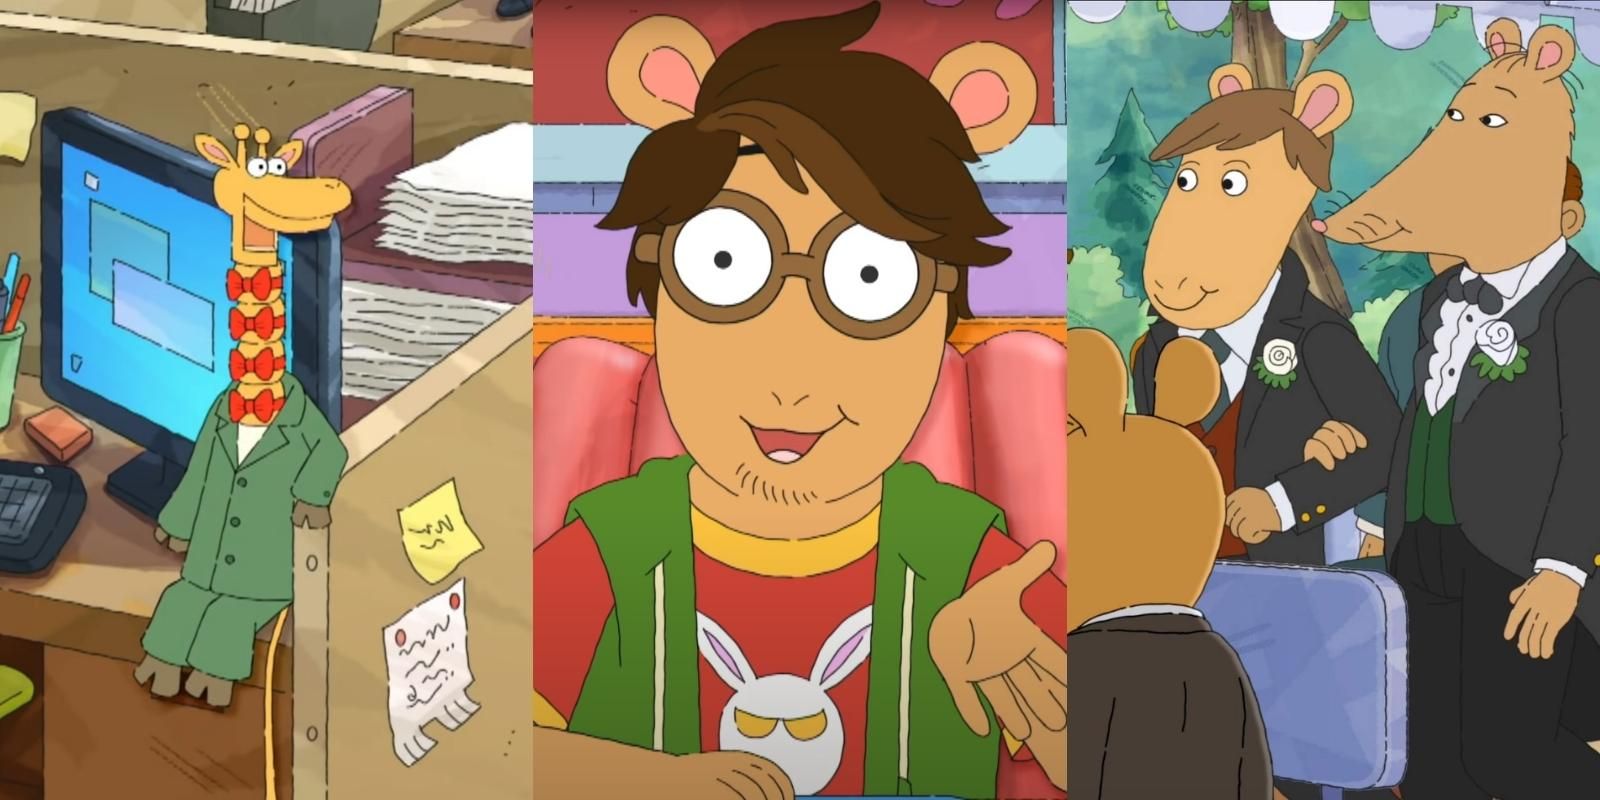 Split image of Wally the giraffe, 28 year old Arthur Read, and Patrick and Nigel Ratburn in PBS Arthur